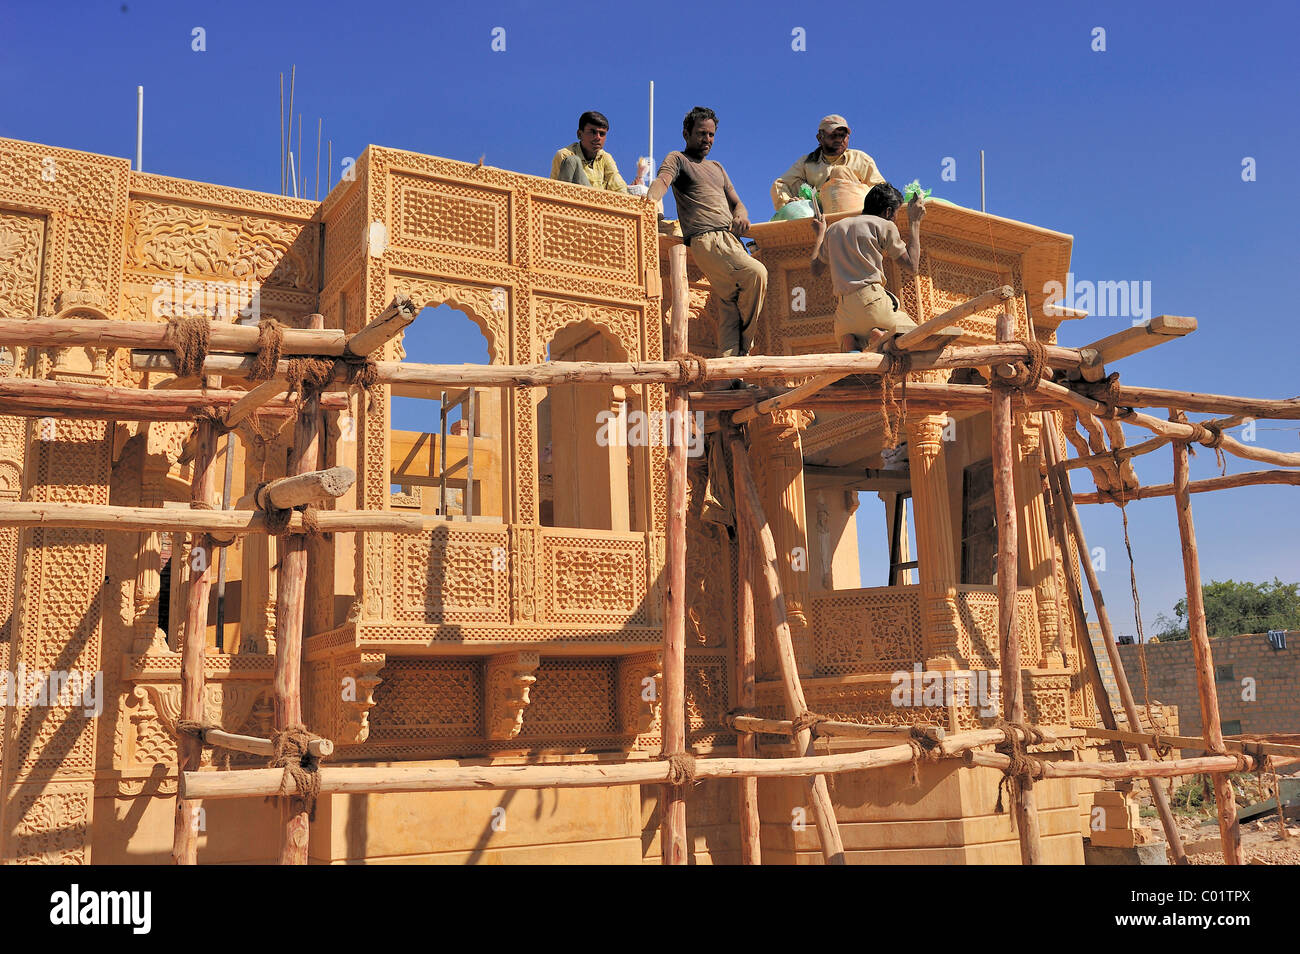 Craftsmen working on a simple wooden frame with knotted ropes on an ornate sandstone facade, Jaisalmer, Rajasthan, India, Asia Stock Photo